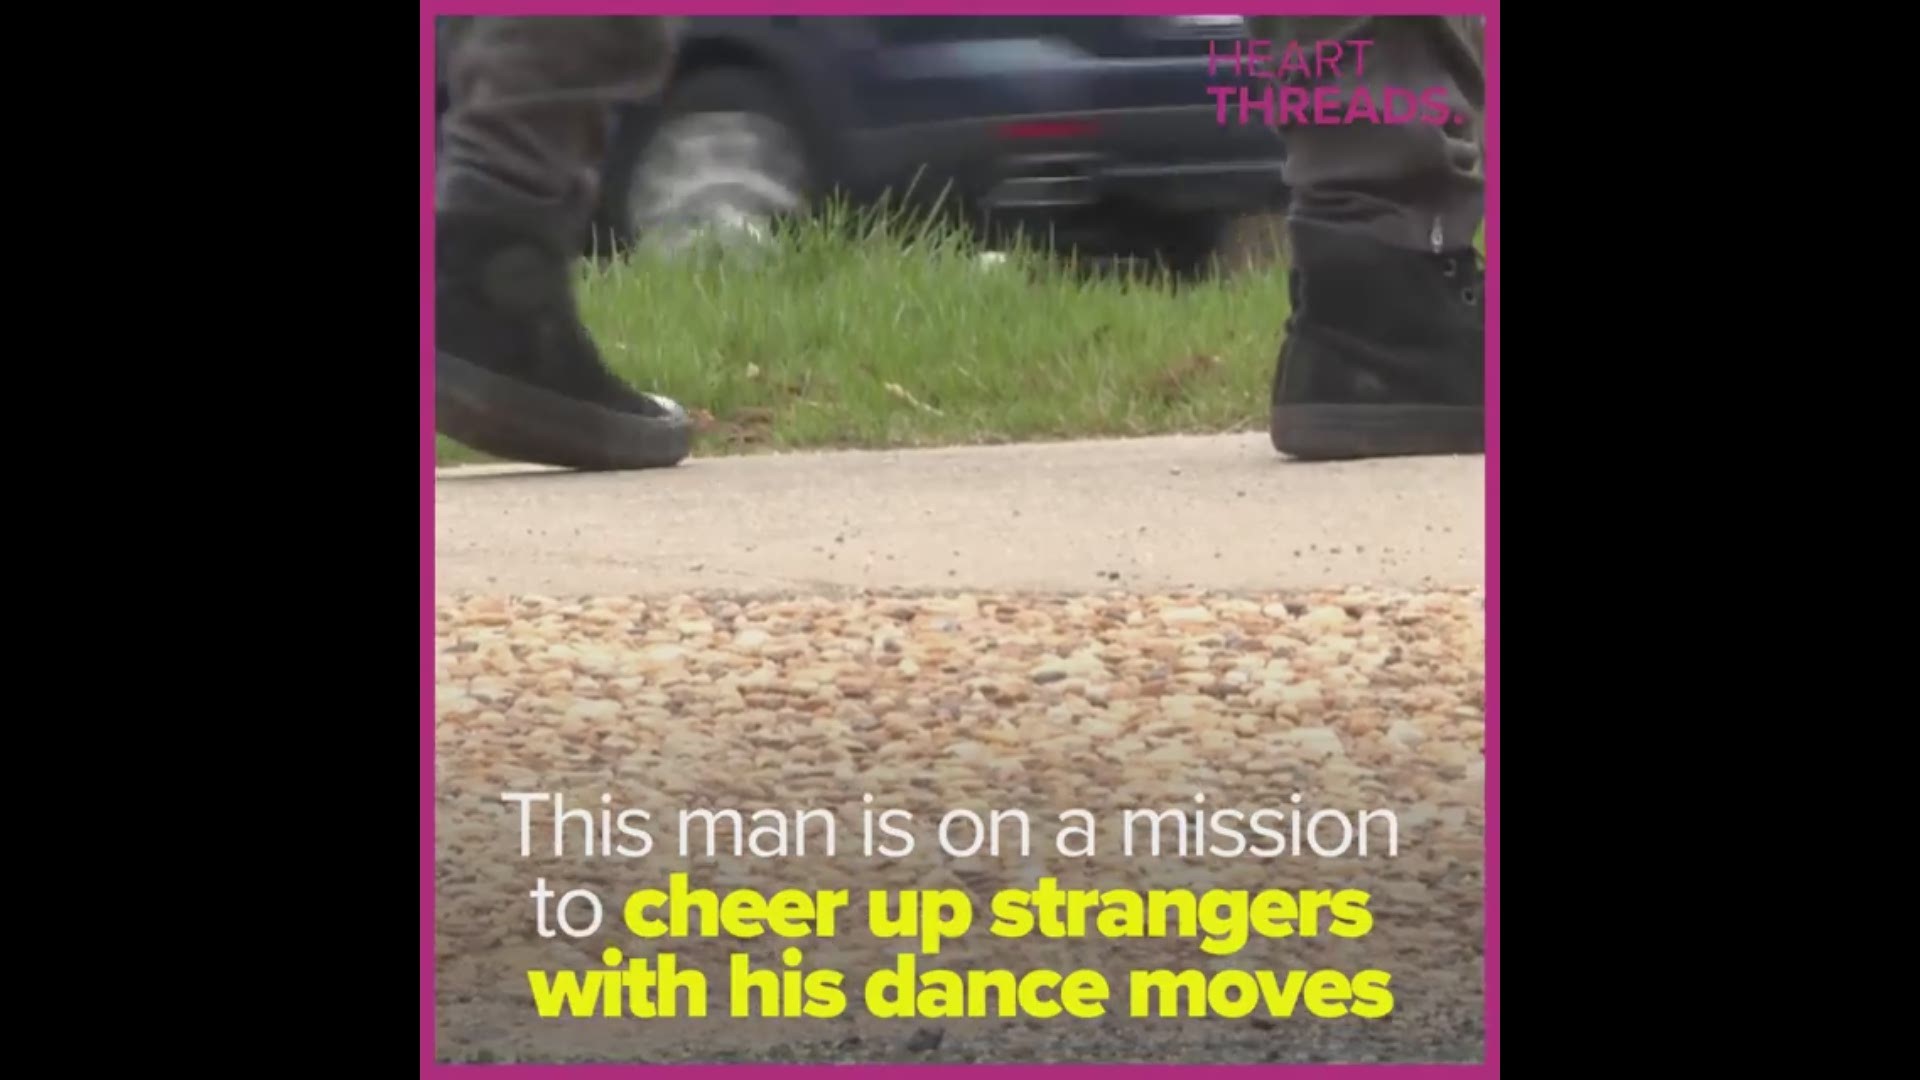 Chris was on his own at just 18. He was in a car accident that cost him a friend and left him with a broken leg. Despite it all, he spreads joy by dancing for passing motorists. See Less